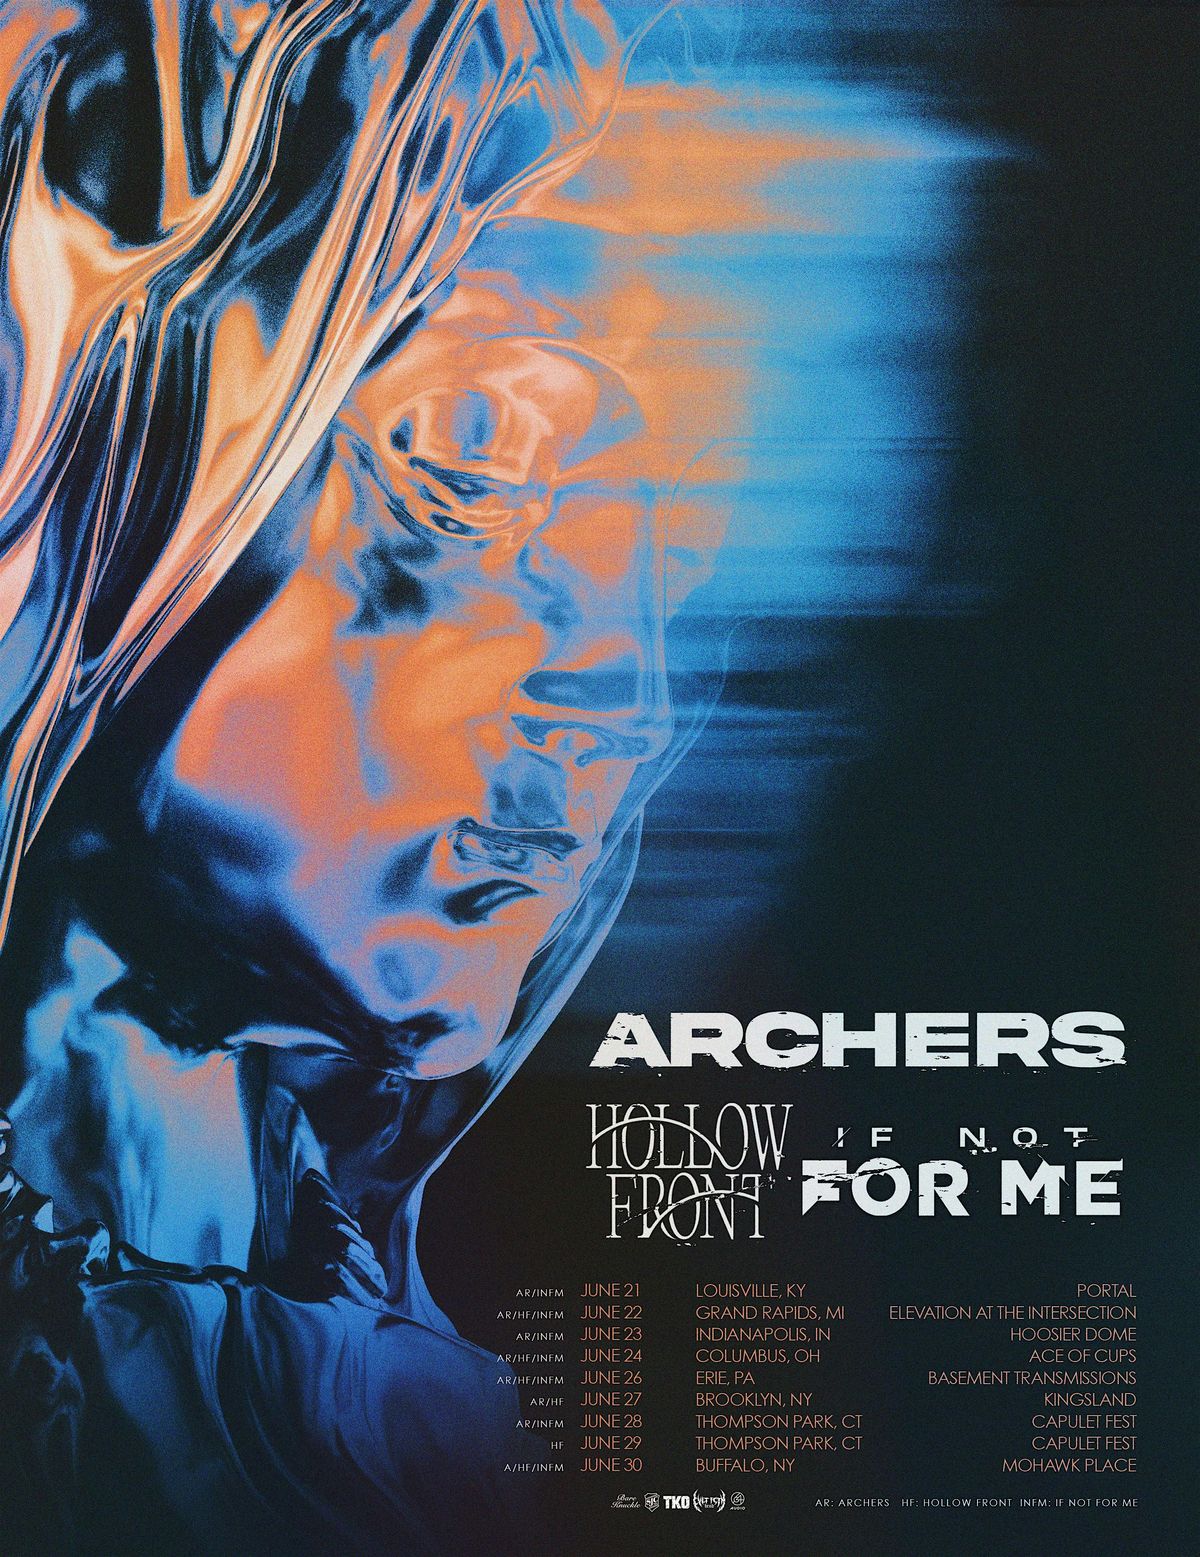 Archers, Hollow Front, If Not For Me, Dead Cassette At Basement Transmissio